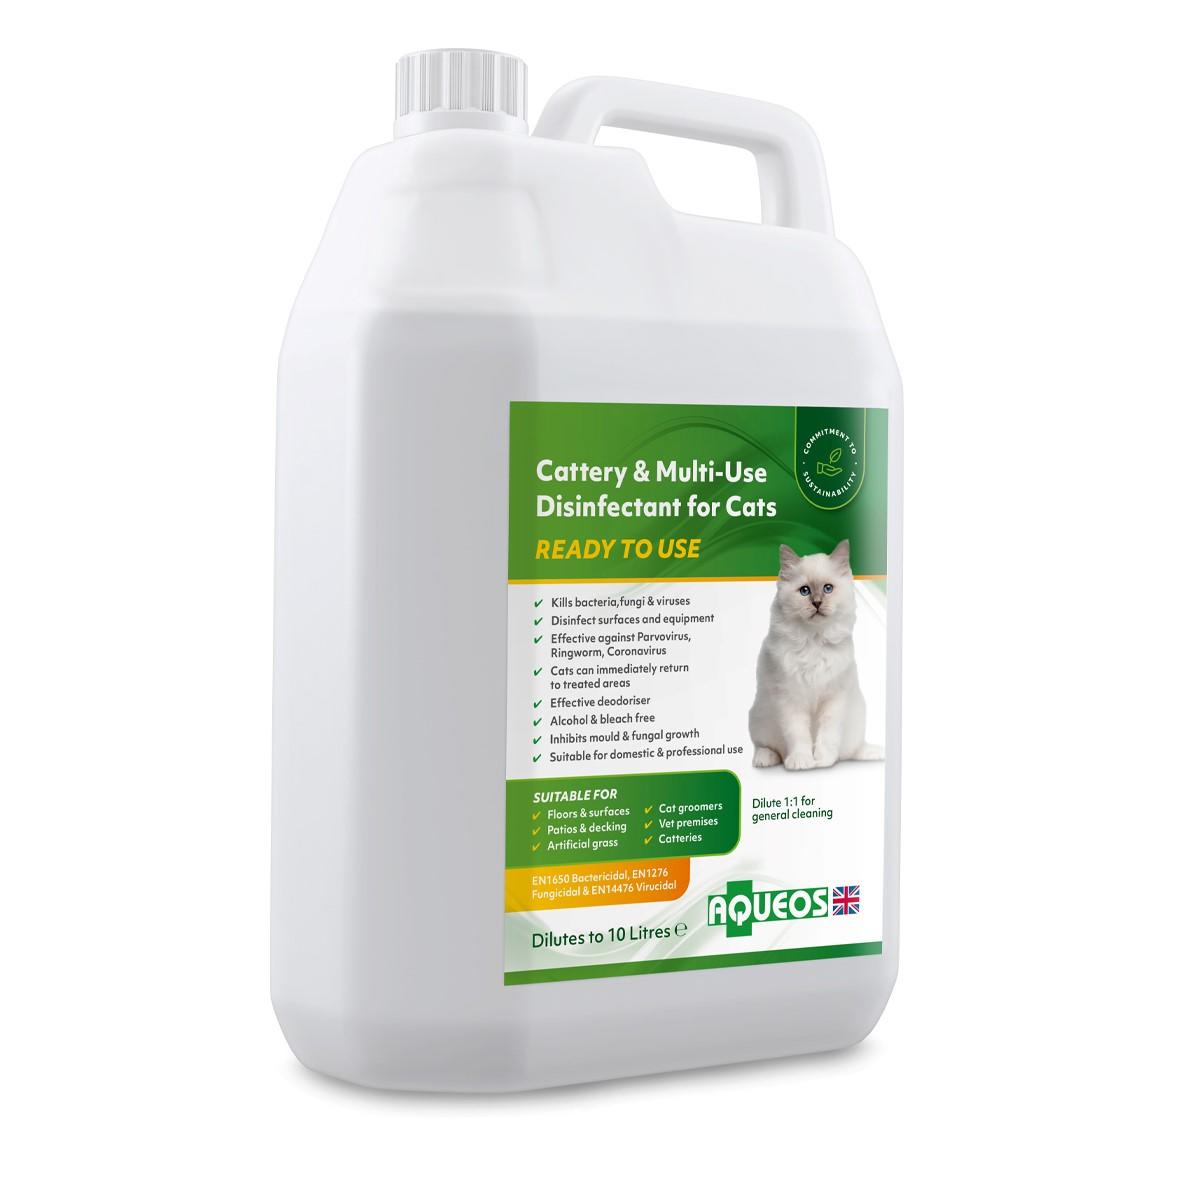 Disinfectant for cats